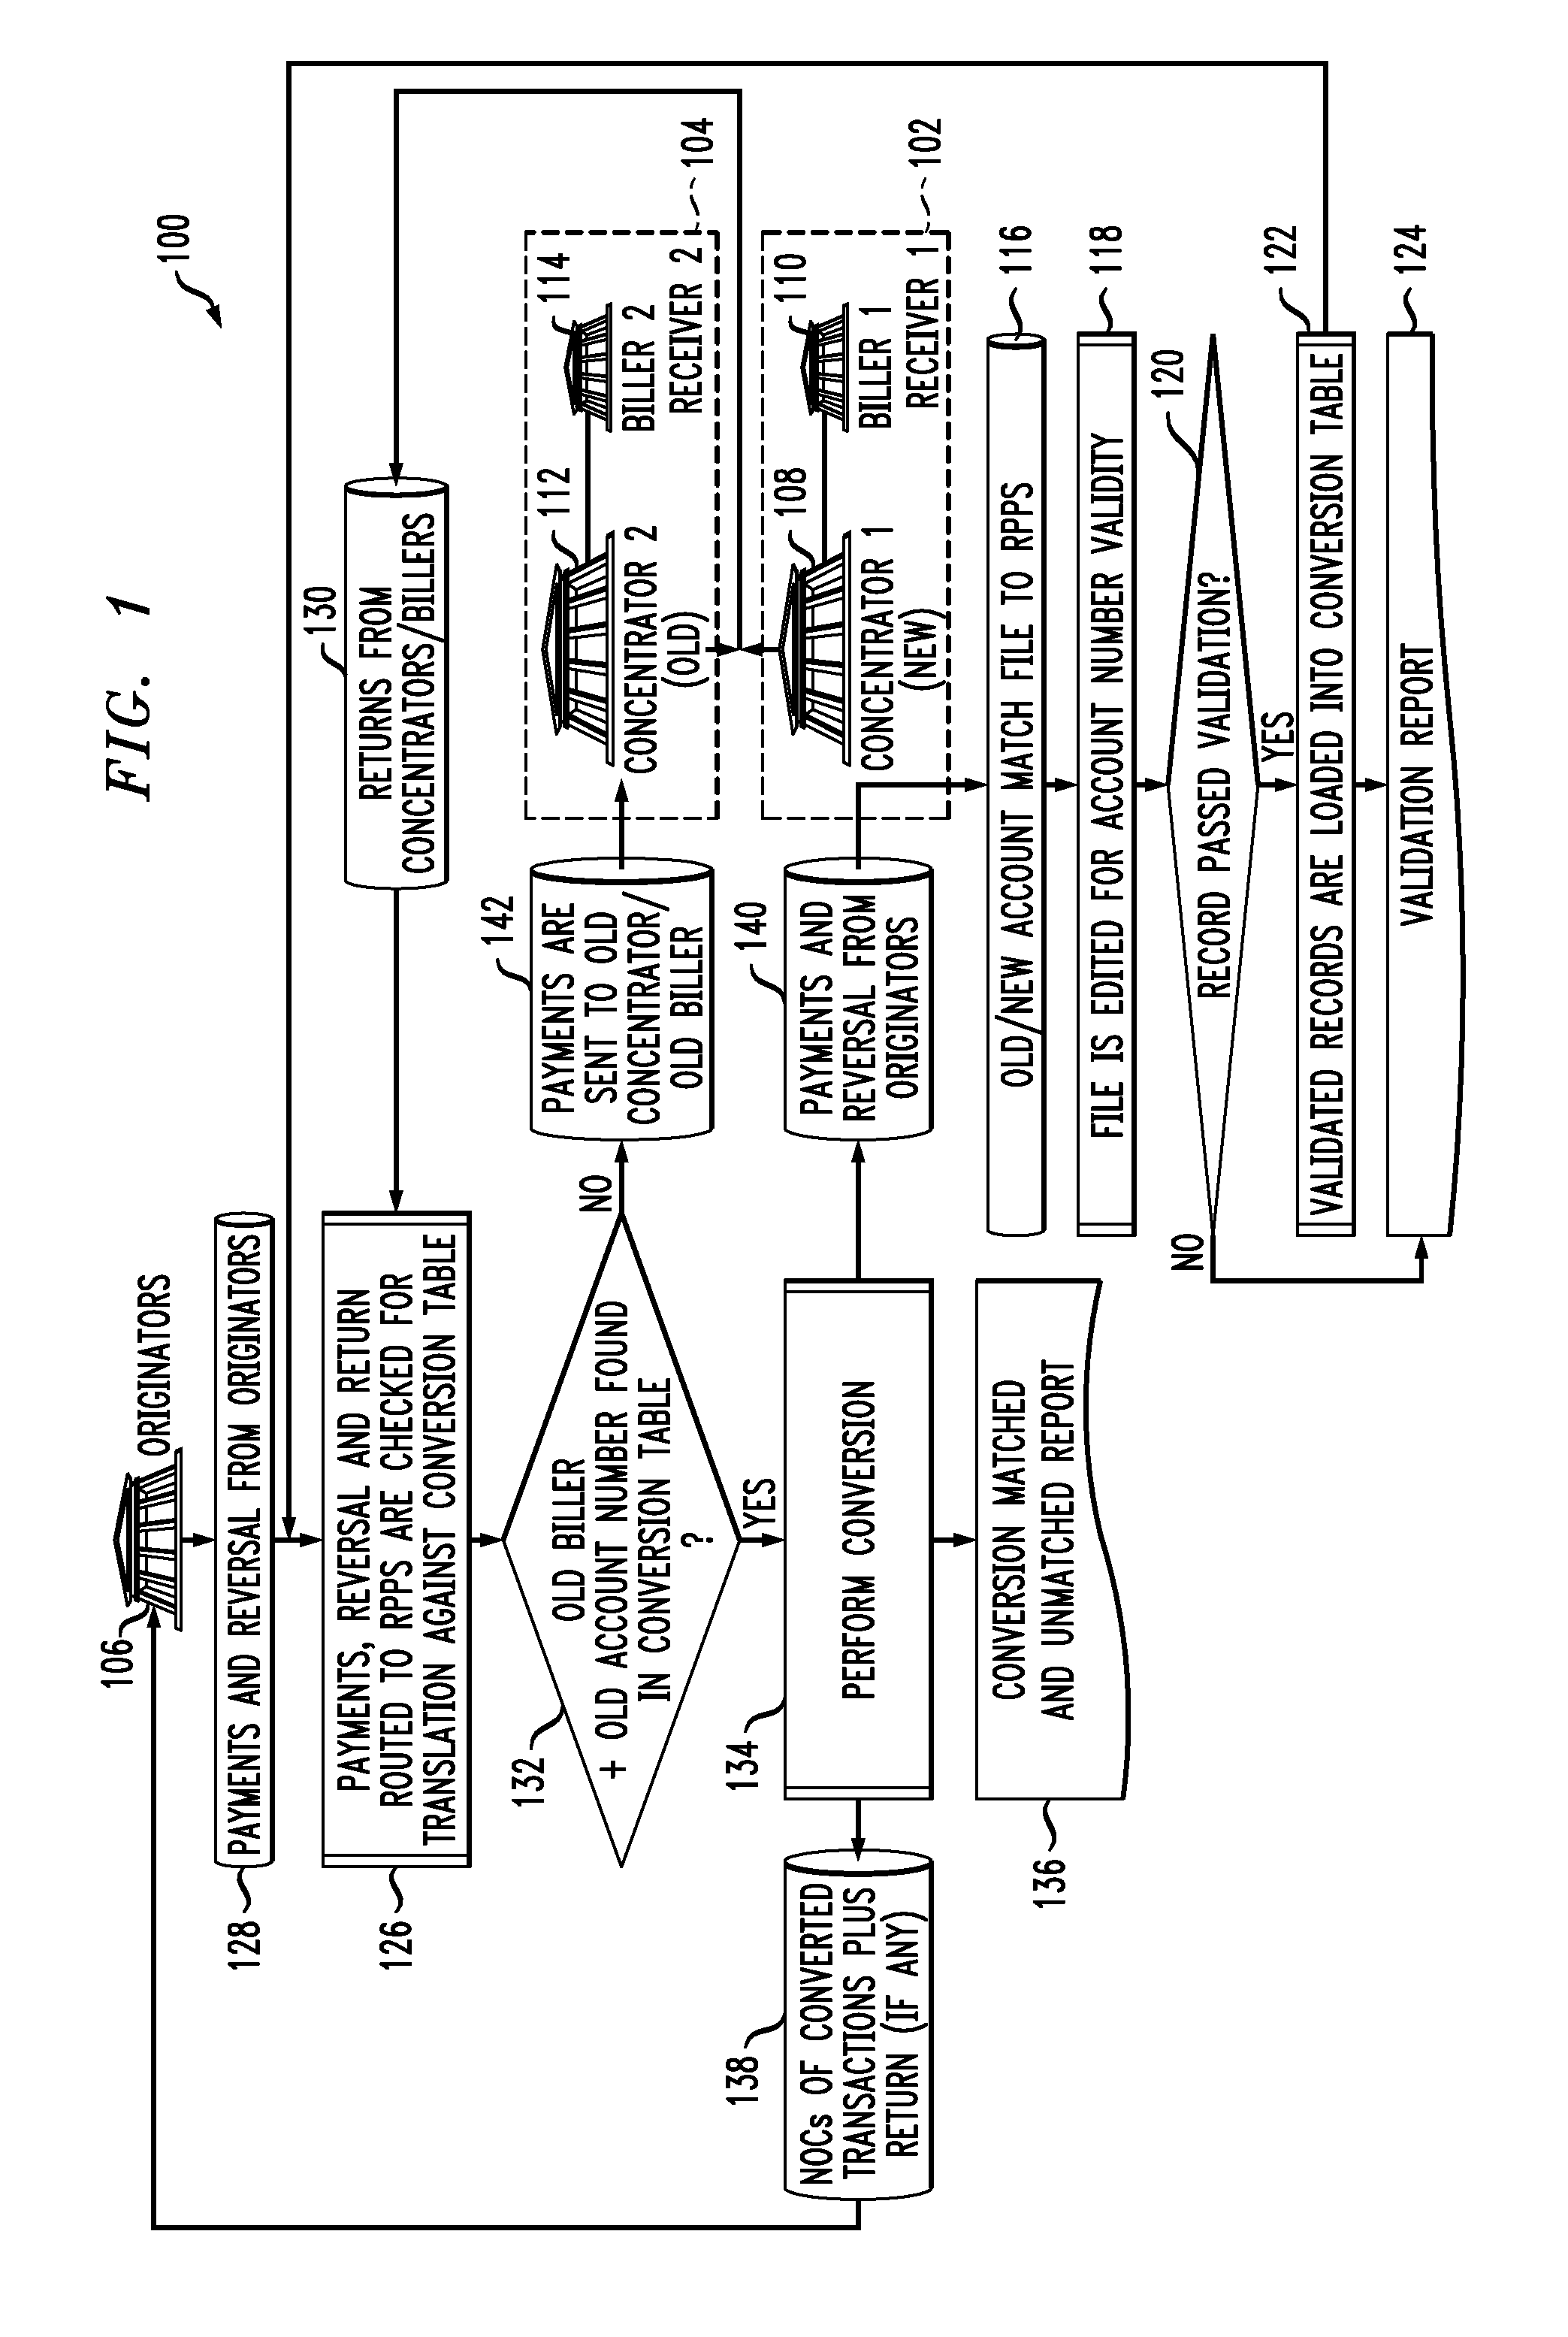 Apparatus And Method For Facilitating Account Restructuring In An Electronic Bill Payment System